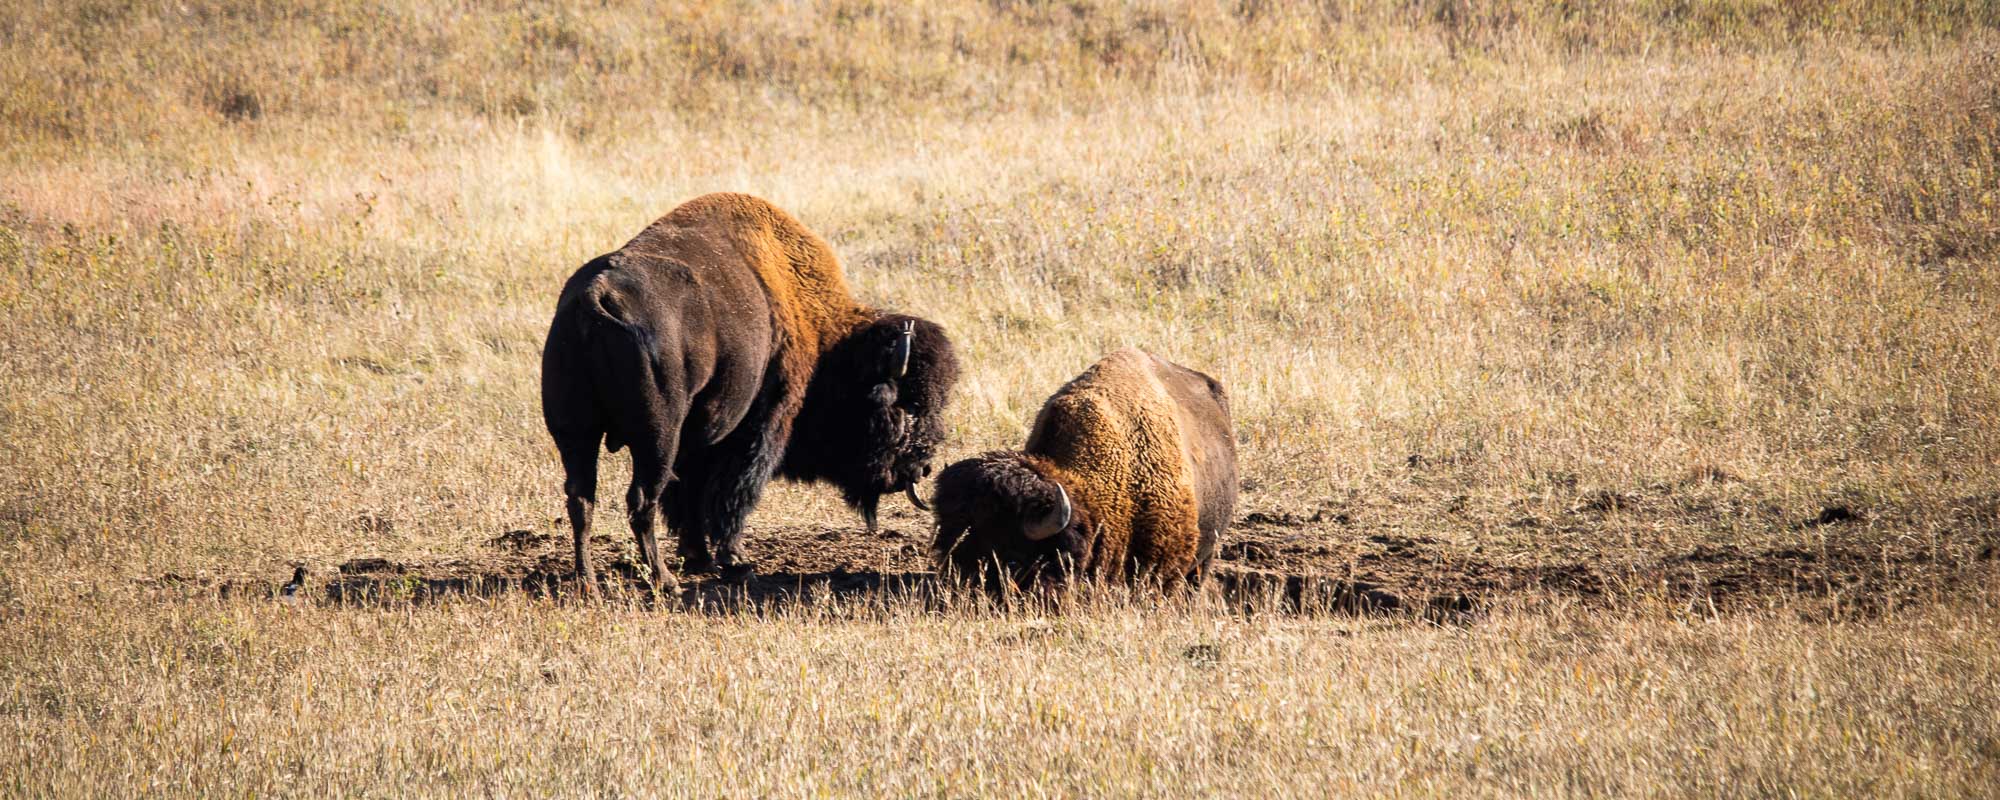 Wind Cave National Park - Bison on the prairie